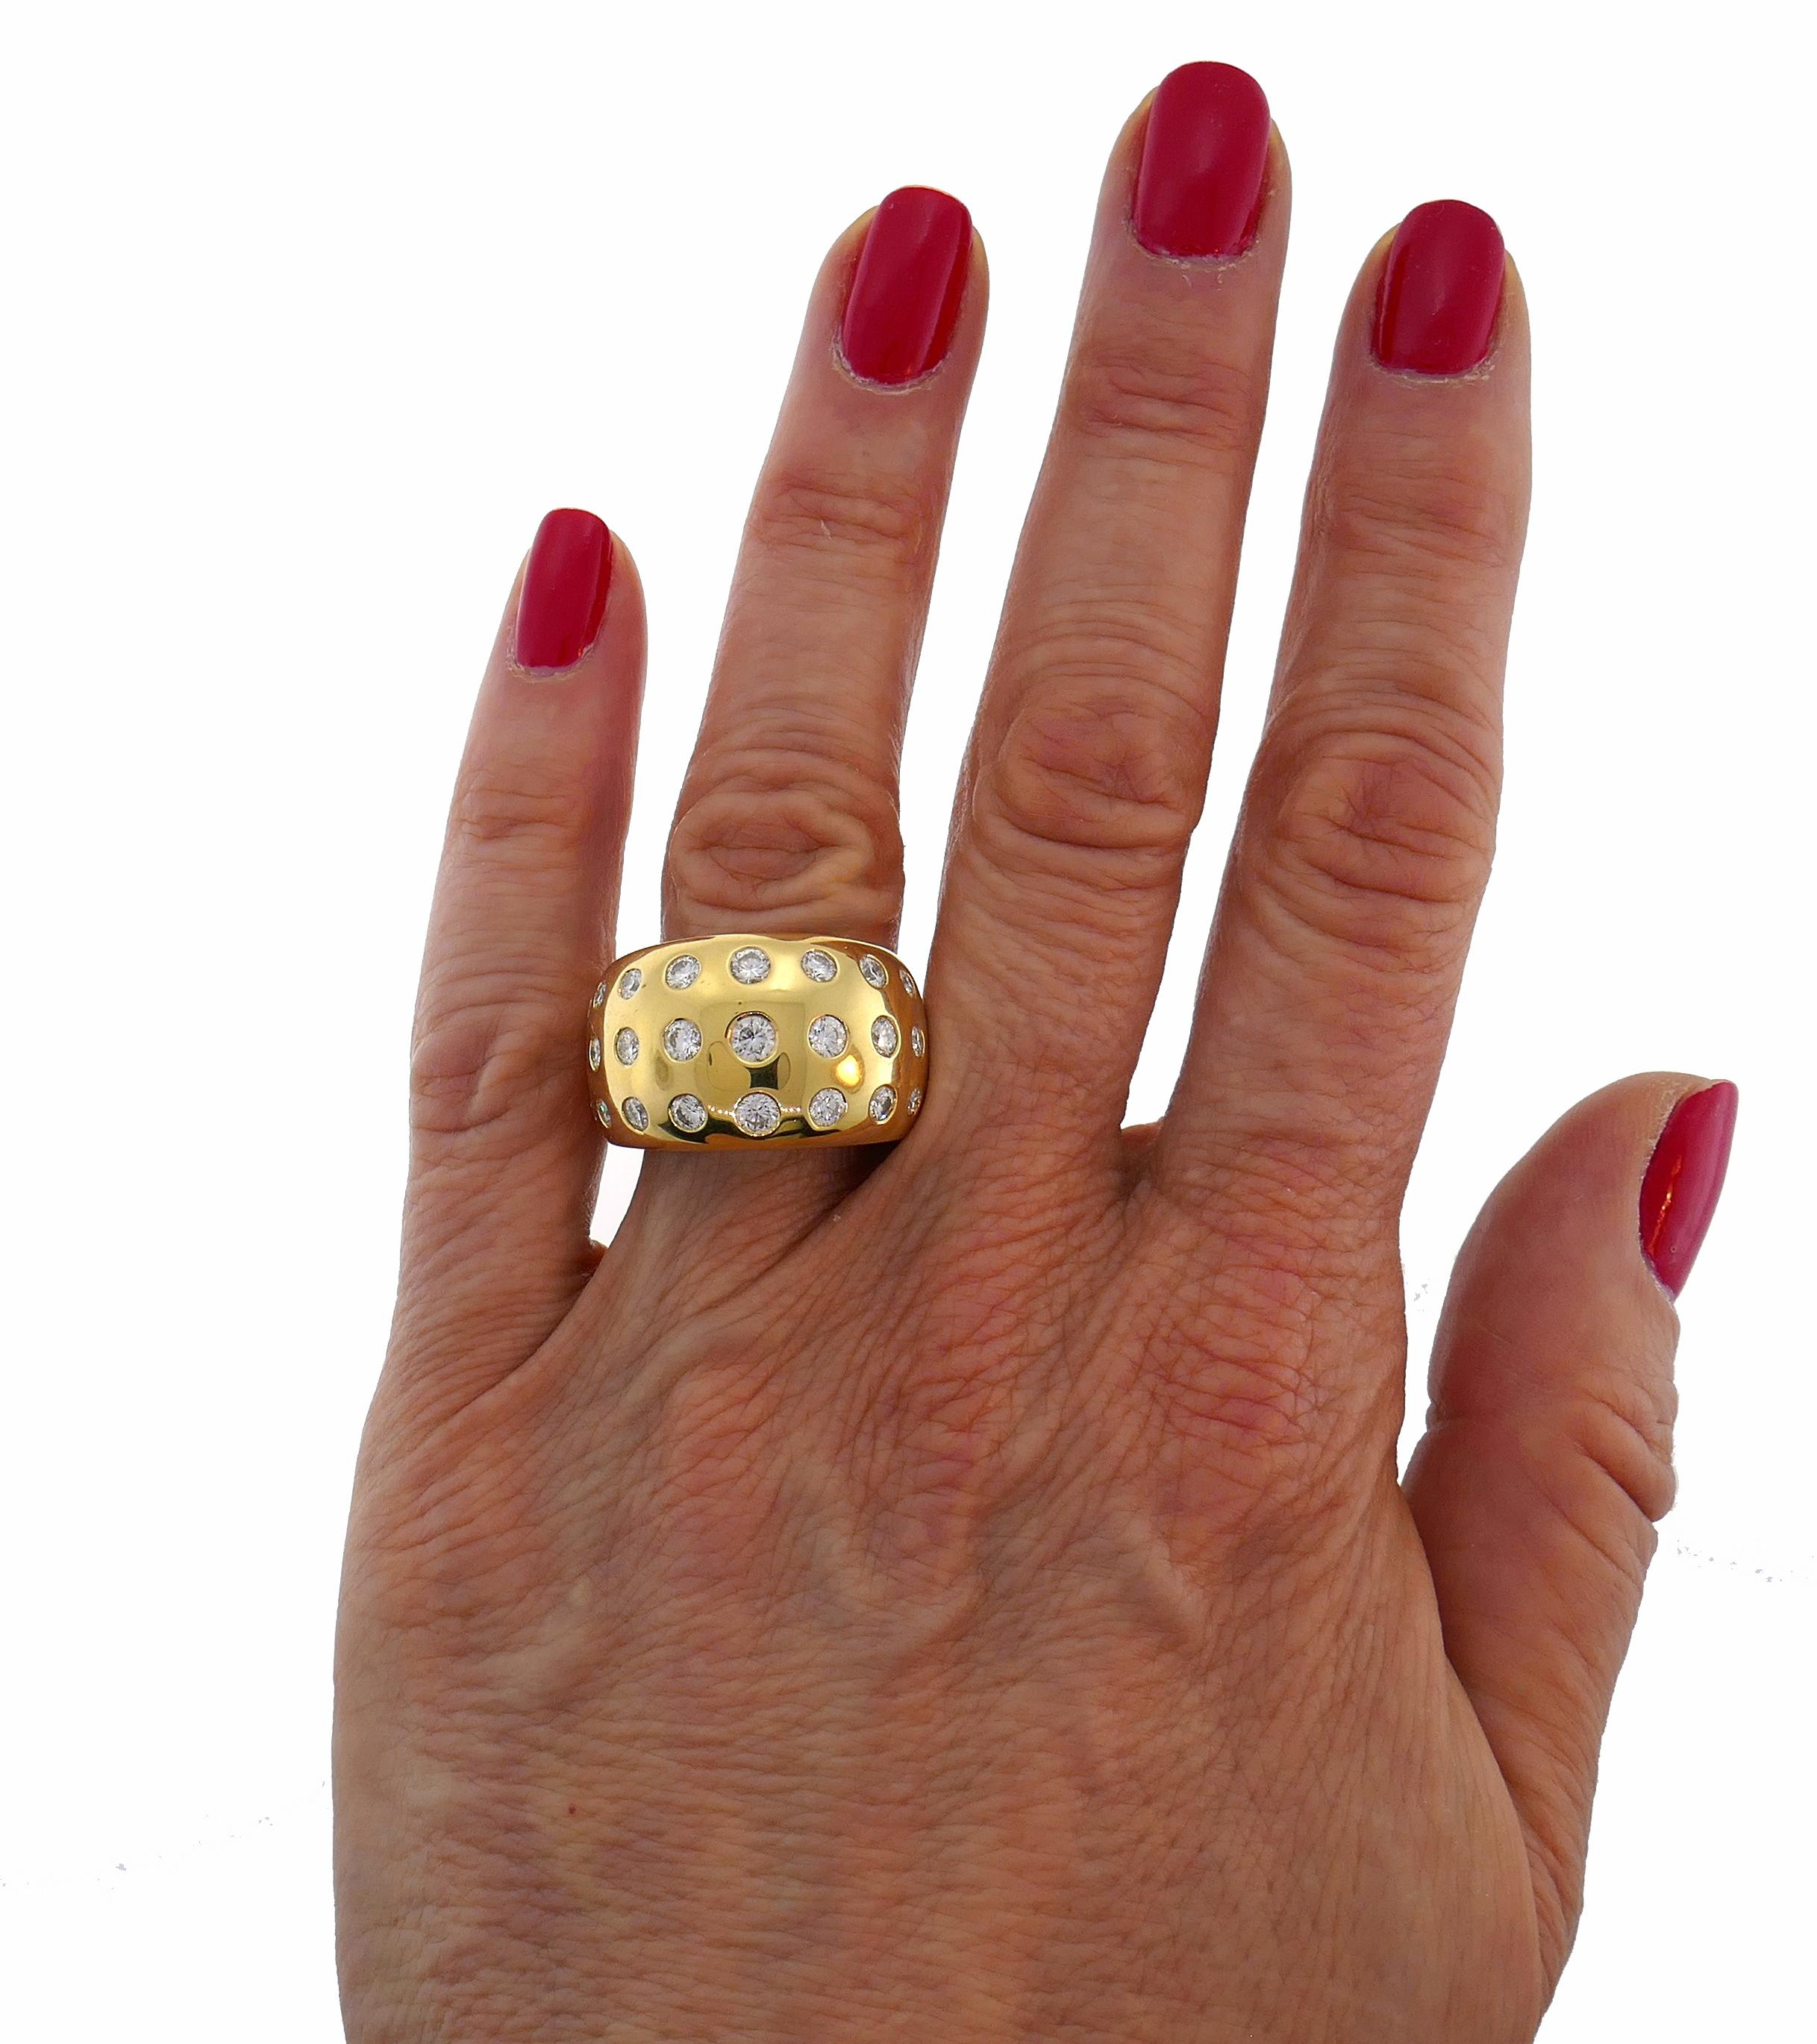 Stunning cocktail ring created by Italian jewelry House Vhernier. Beautiful shape, perfect lines, tasteful combination of yellow gold and chalcedony with diamond sparkles are the highlights of this chic ring. Stylish and wearable, the ring is a